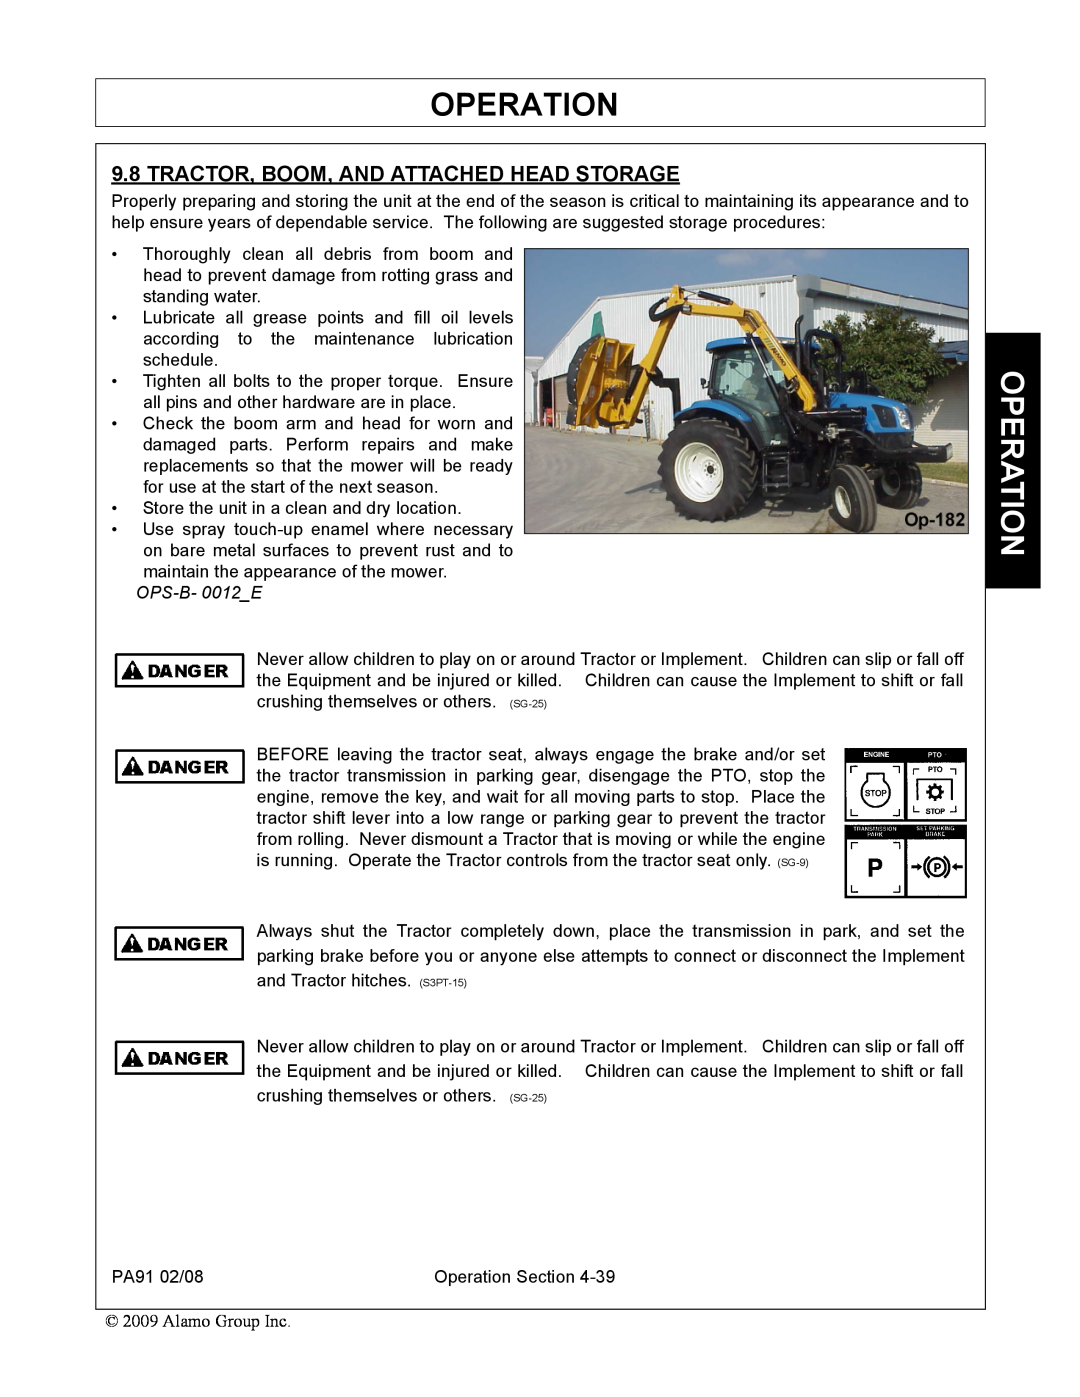 Alamo 7191852C manual Tractor, Boom, And Attached Head Storage, Operation, OPS-B-0012_E 